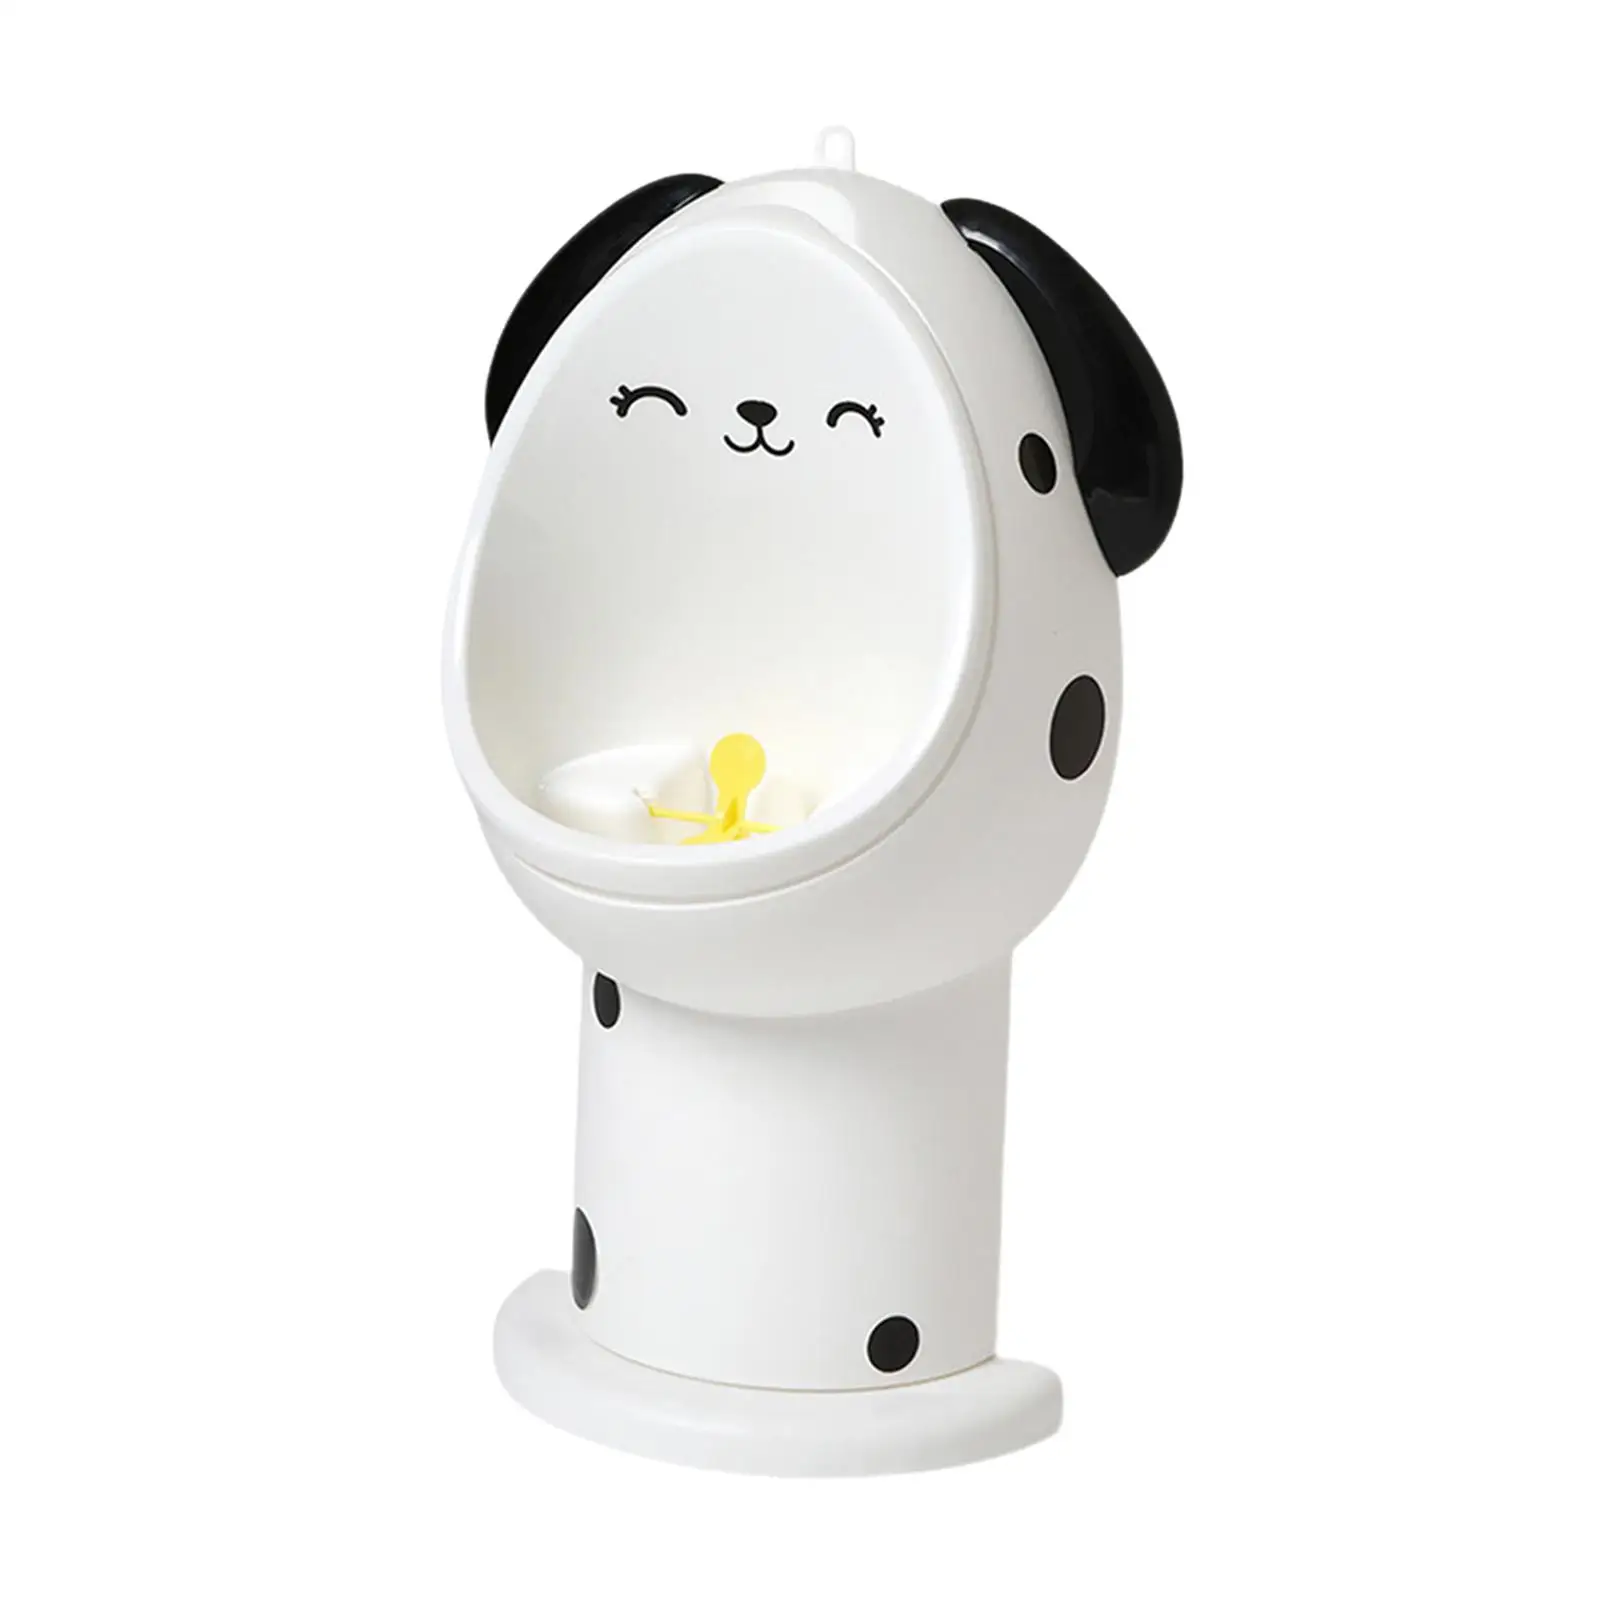 Toddler Pee Trainer Potty Urinal Toilet Boy Standing Urinal Built in Rotating Windmill Convenient Cute Baby Potties Wall Mounted